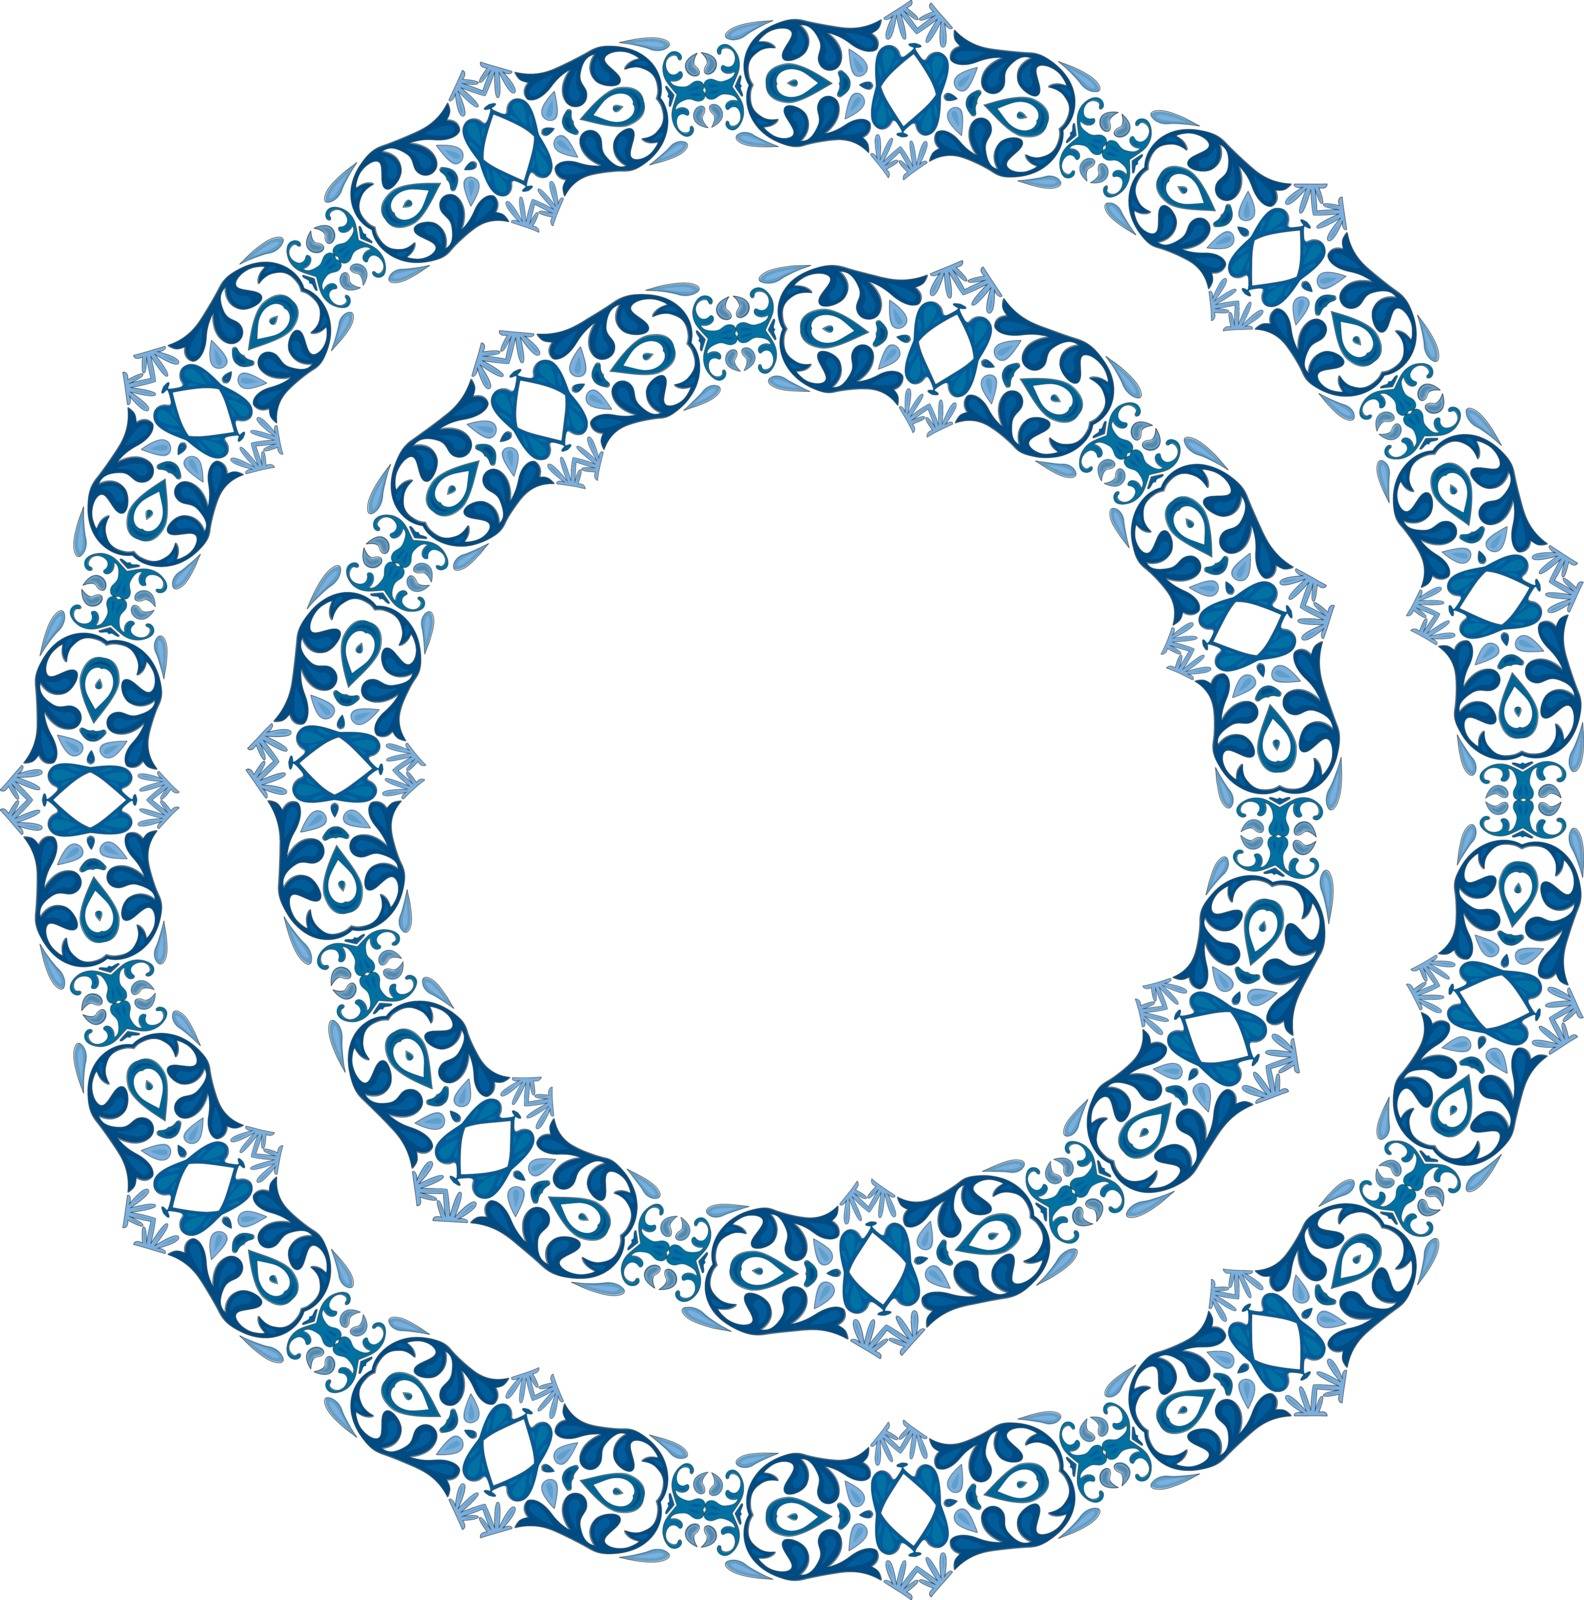 Decorative illustrated circle frames made of blue elements